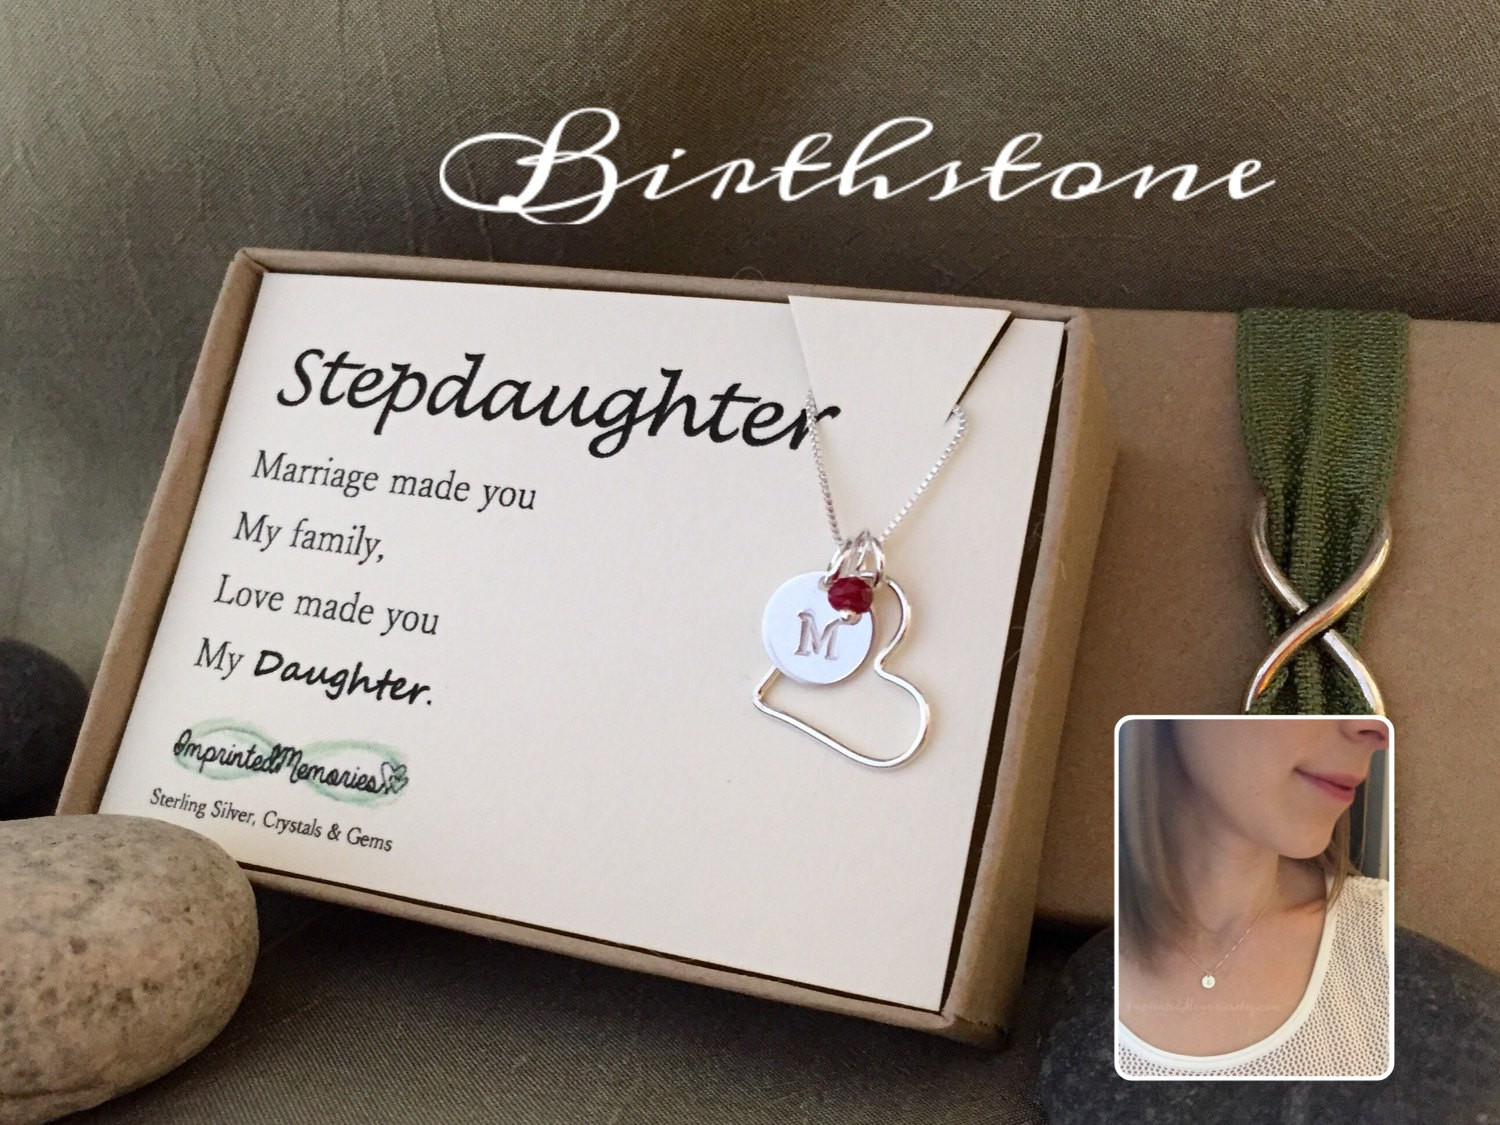 Wedding Gift Ideas From Mother To Daughter
 Stepdaughter t new stepdaughter wedding t marriage